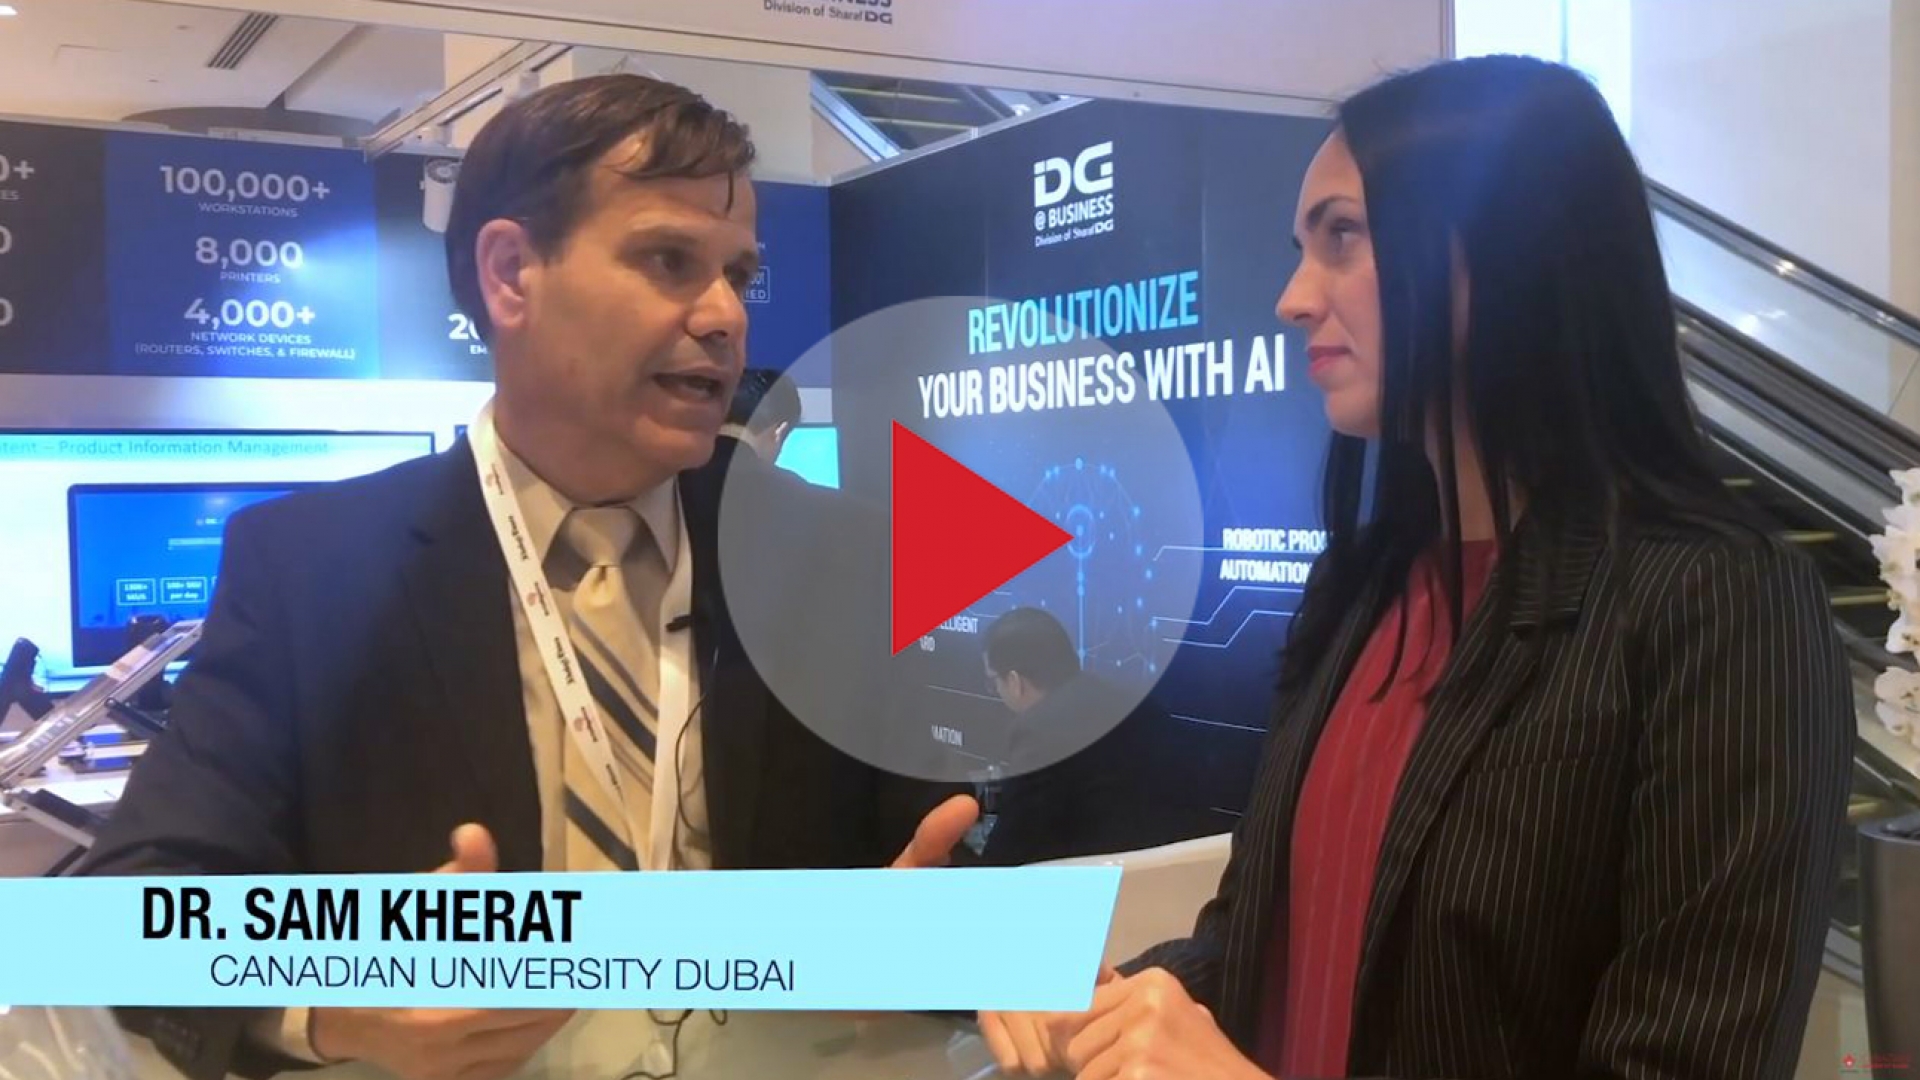 Canadian University Dubai charts strategy for AI advancement, in line with UAE’s drive to be a leader in the field